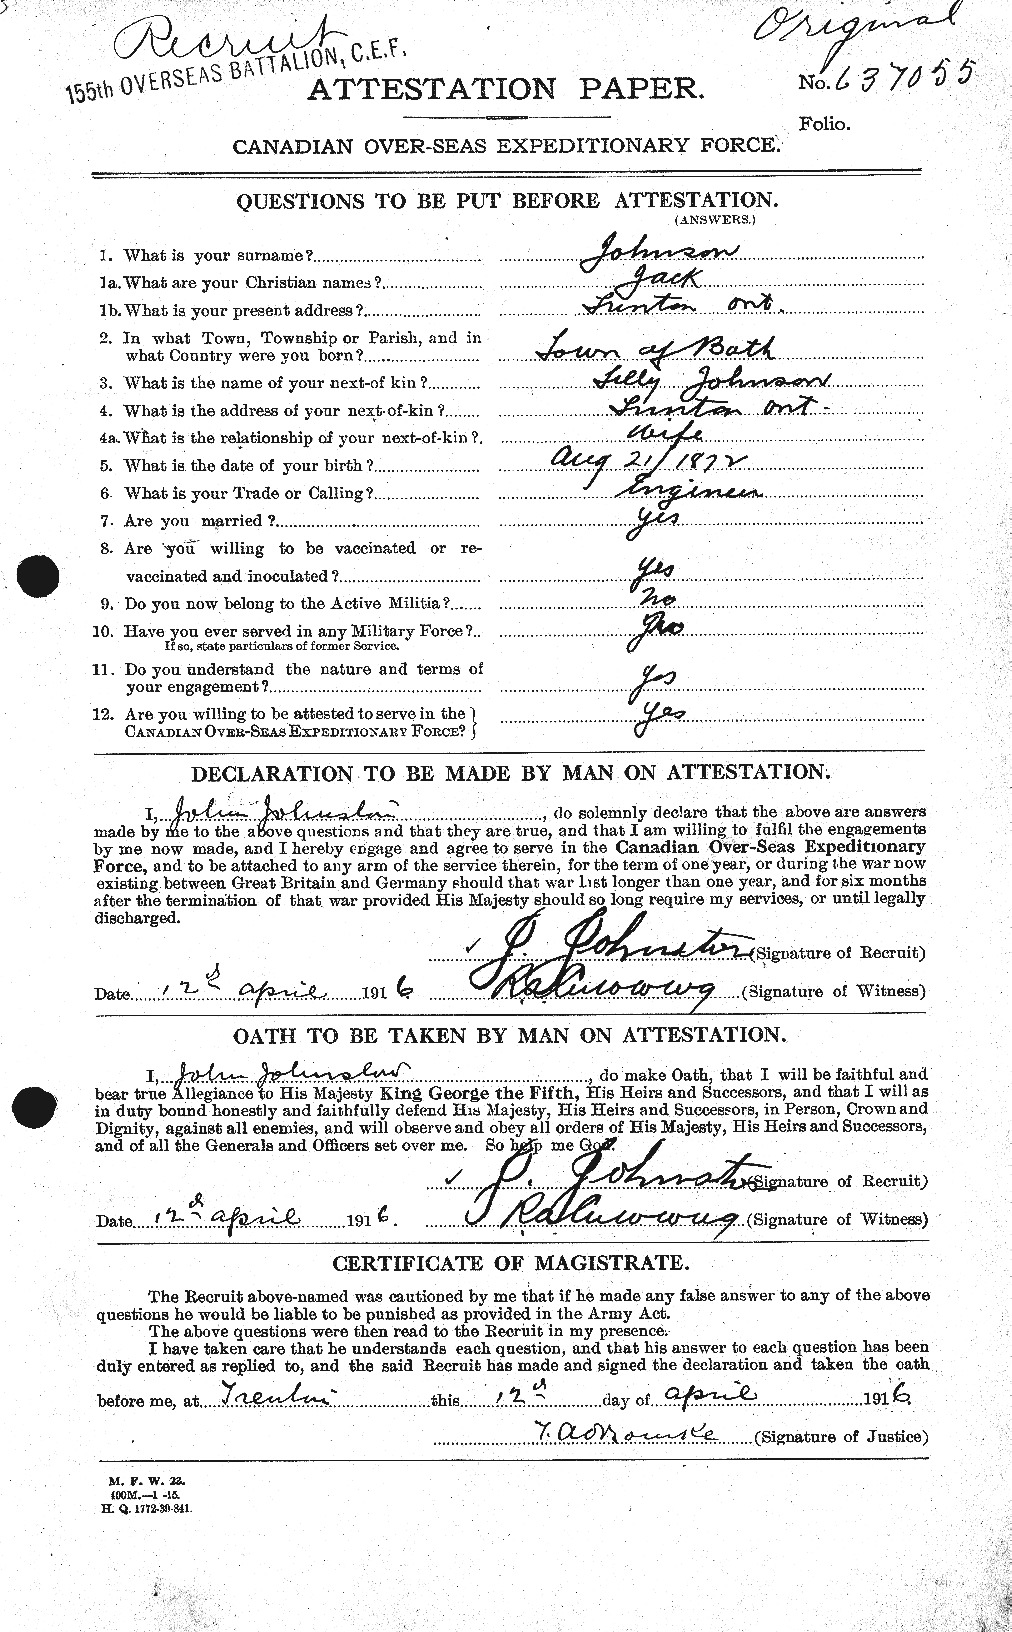 Personnel Records of the First World War - CEF 420585a